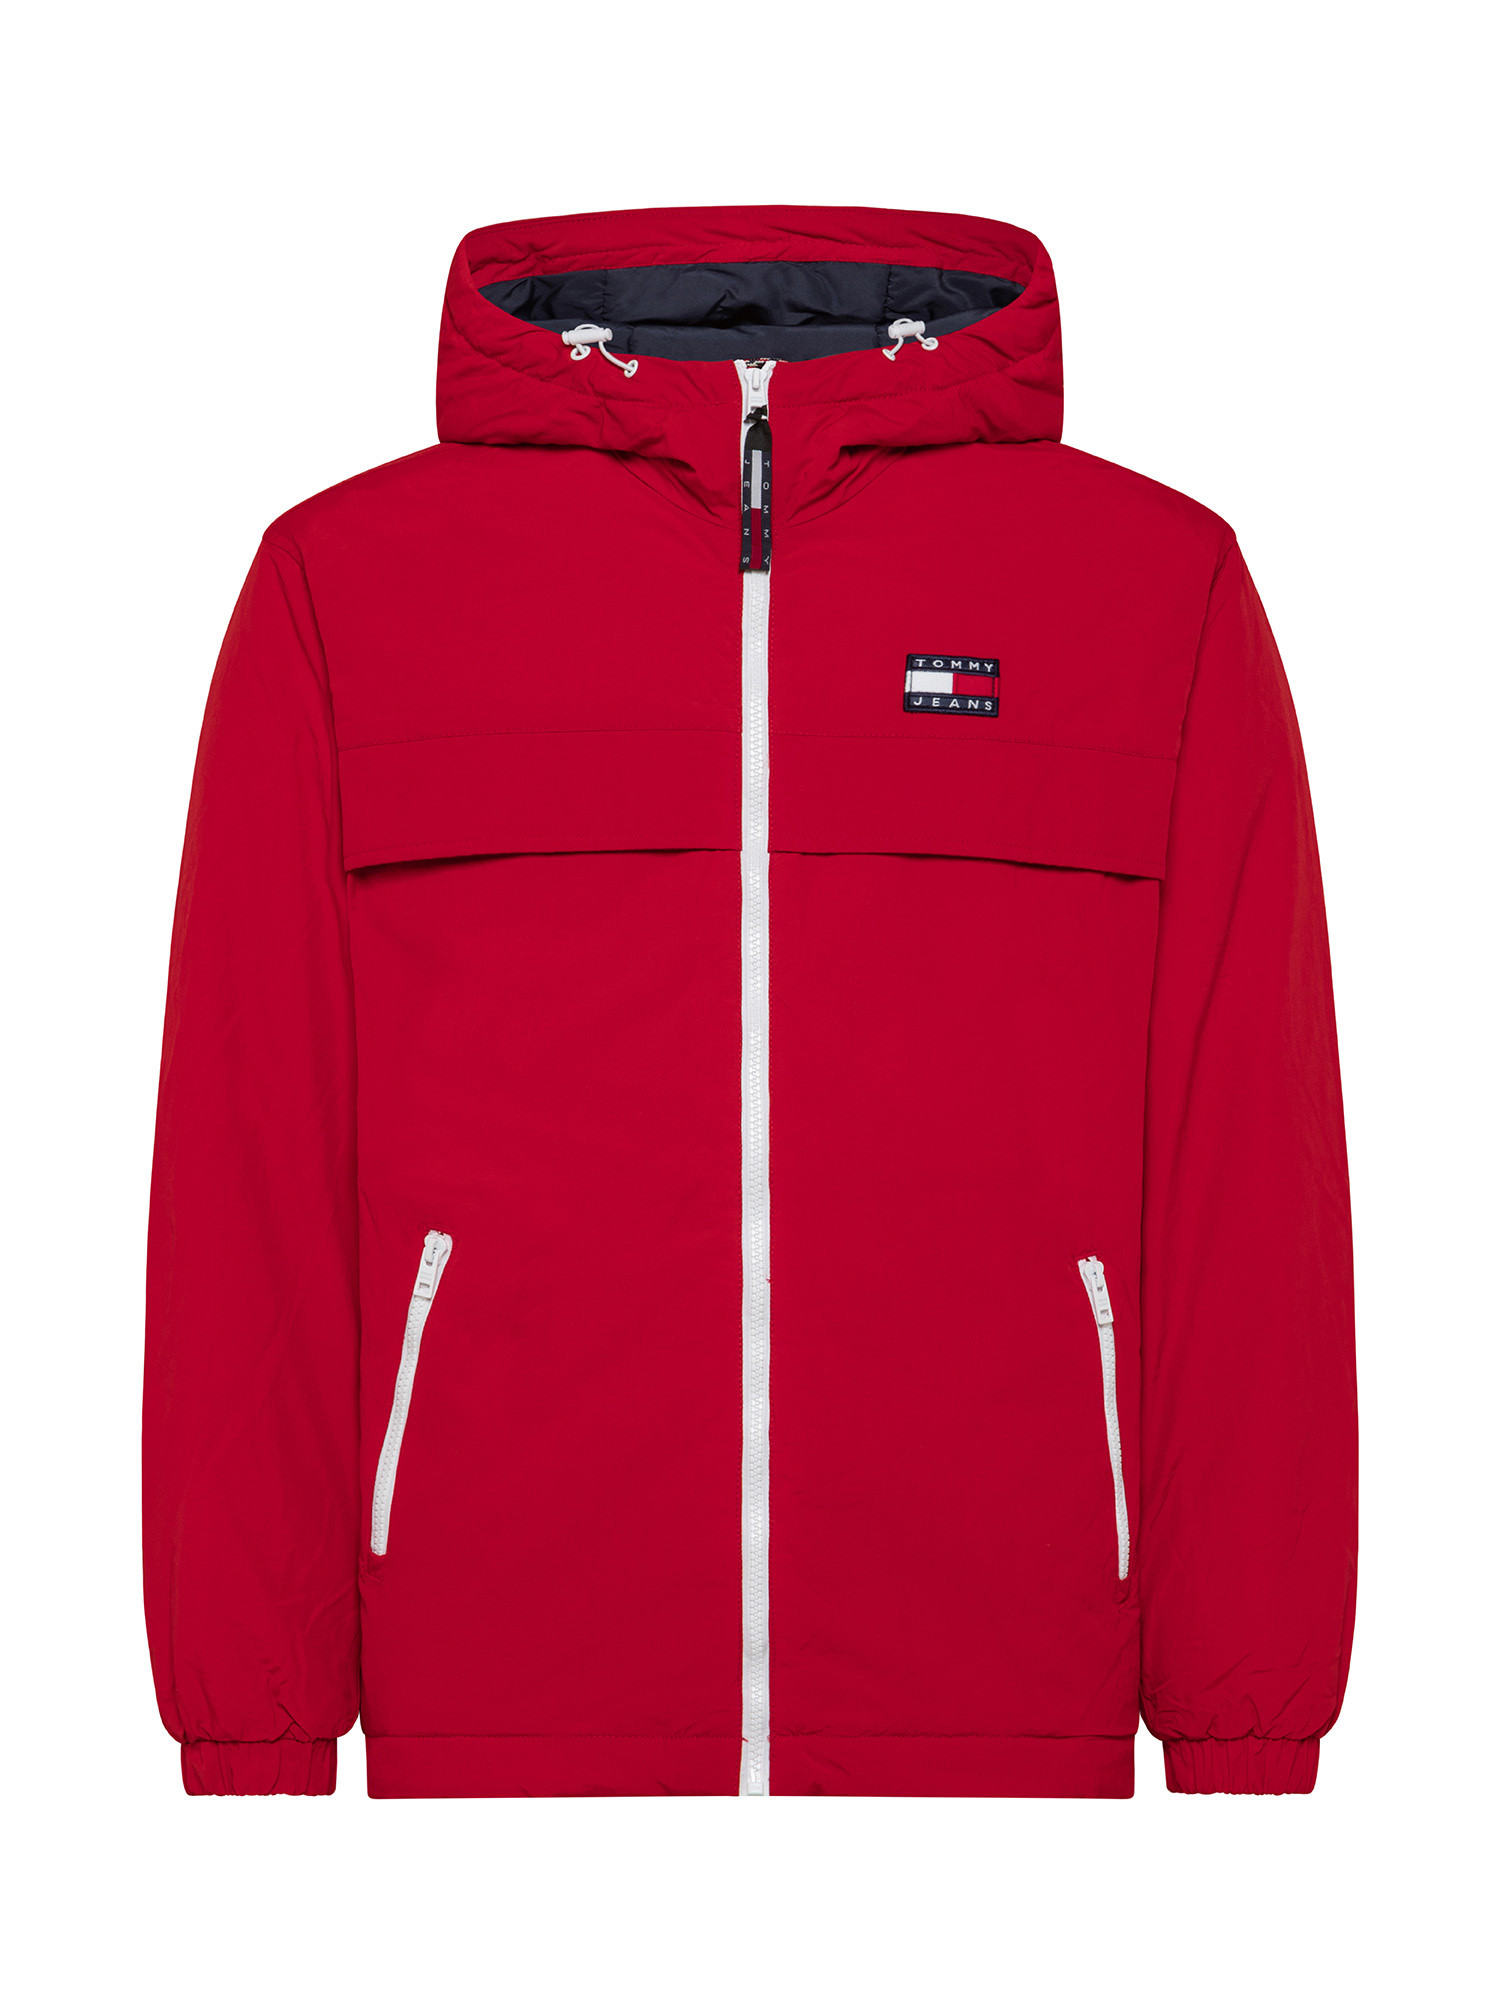 Tommy Jeans - Lightweight hooded jacket, Red, large image number 0